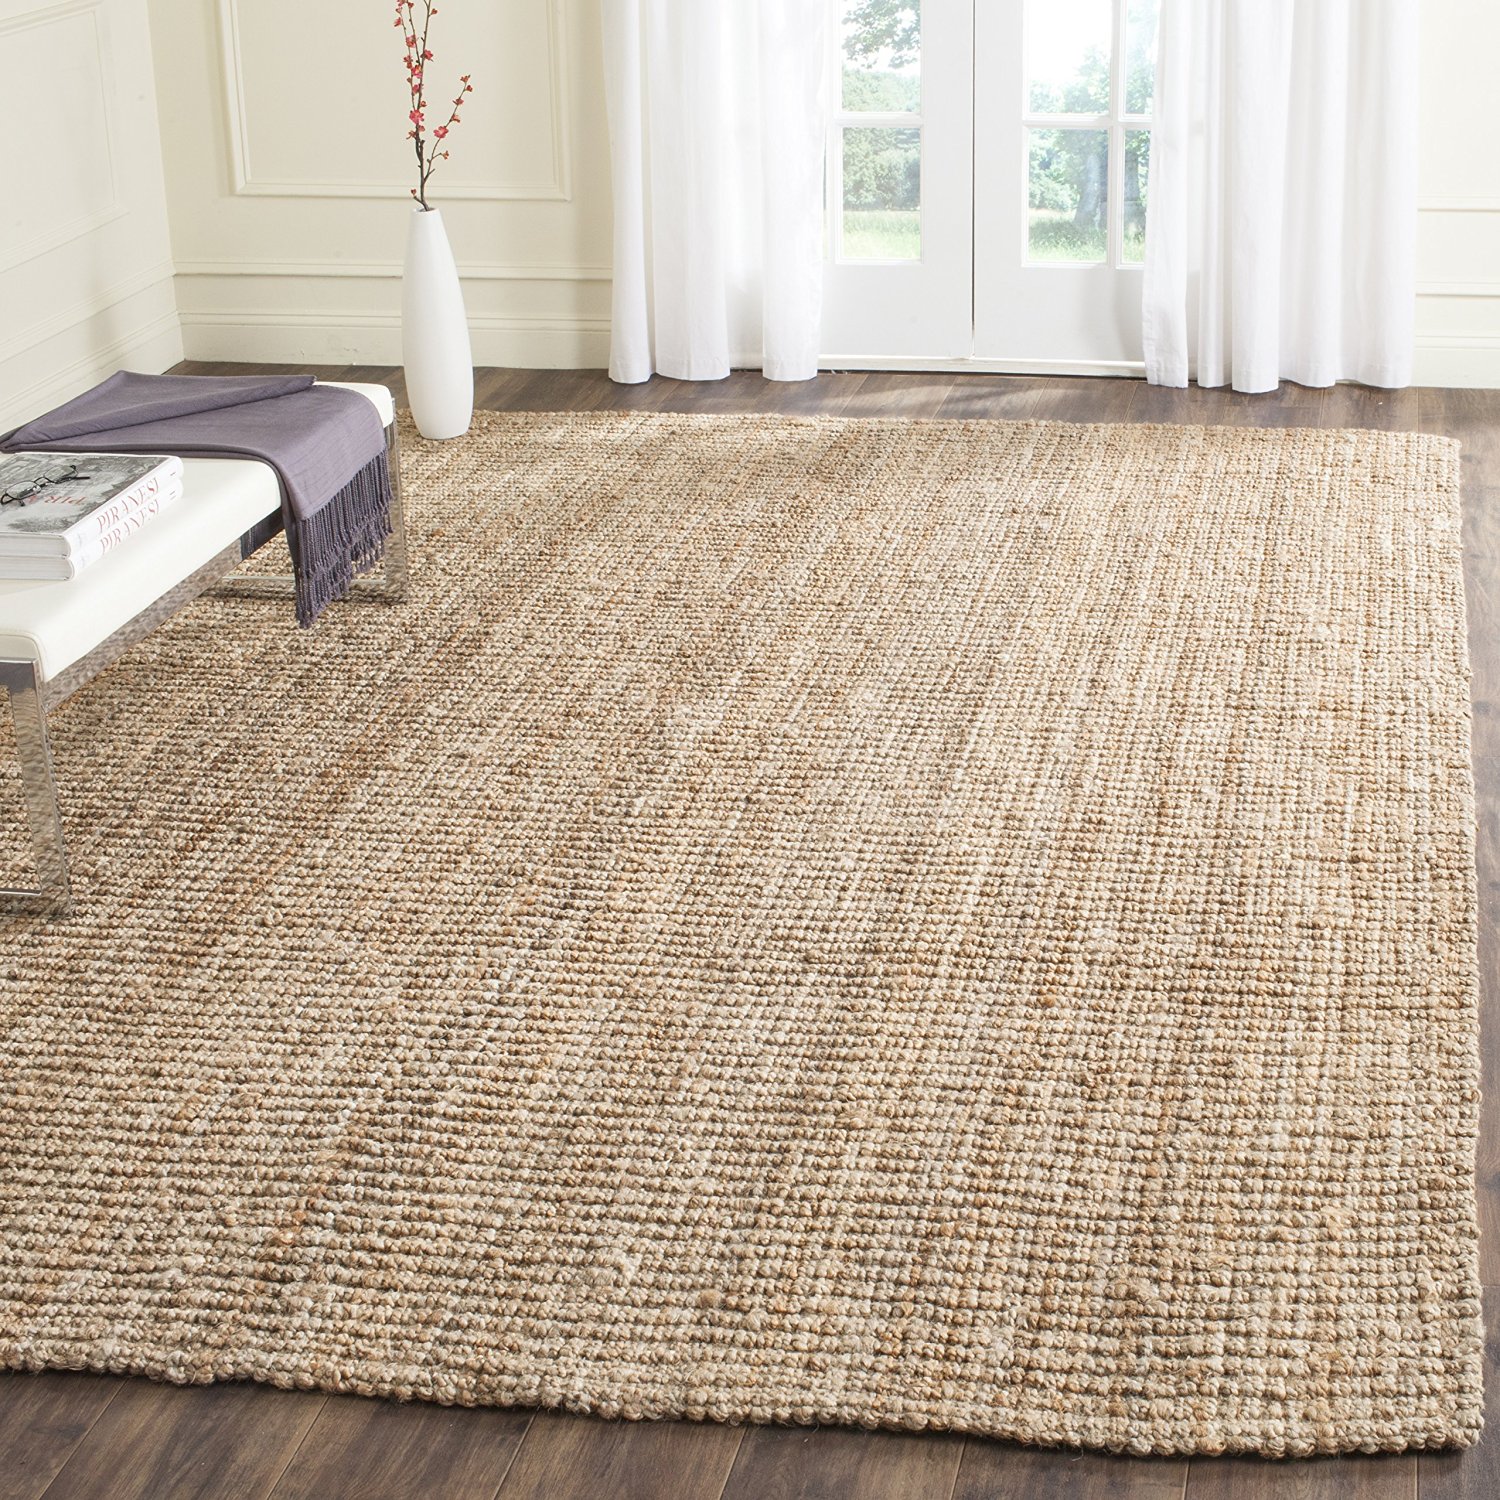 Jute rugs: things you should know